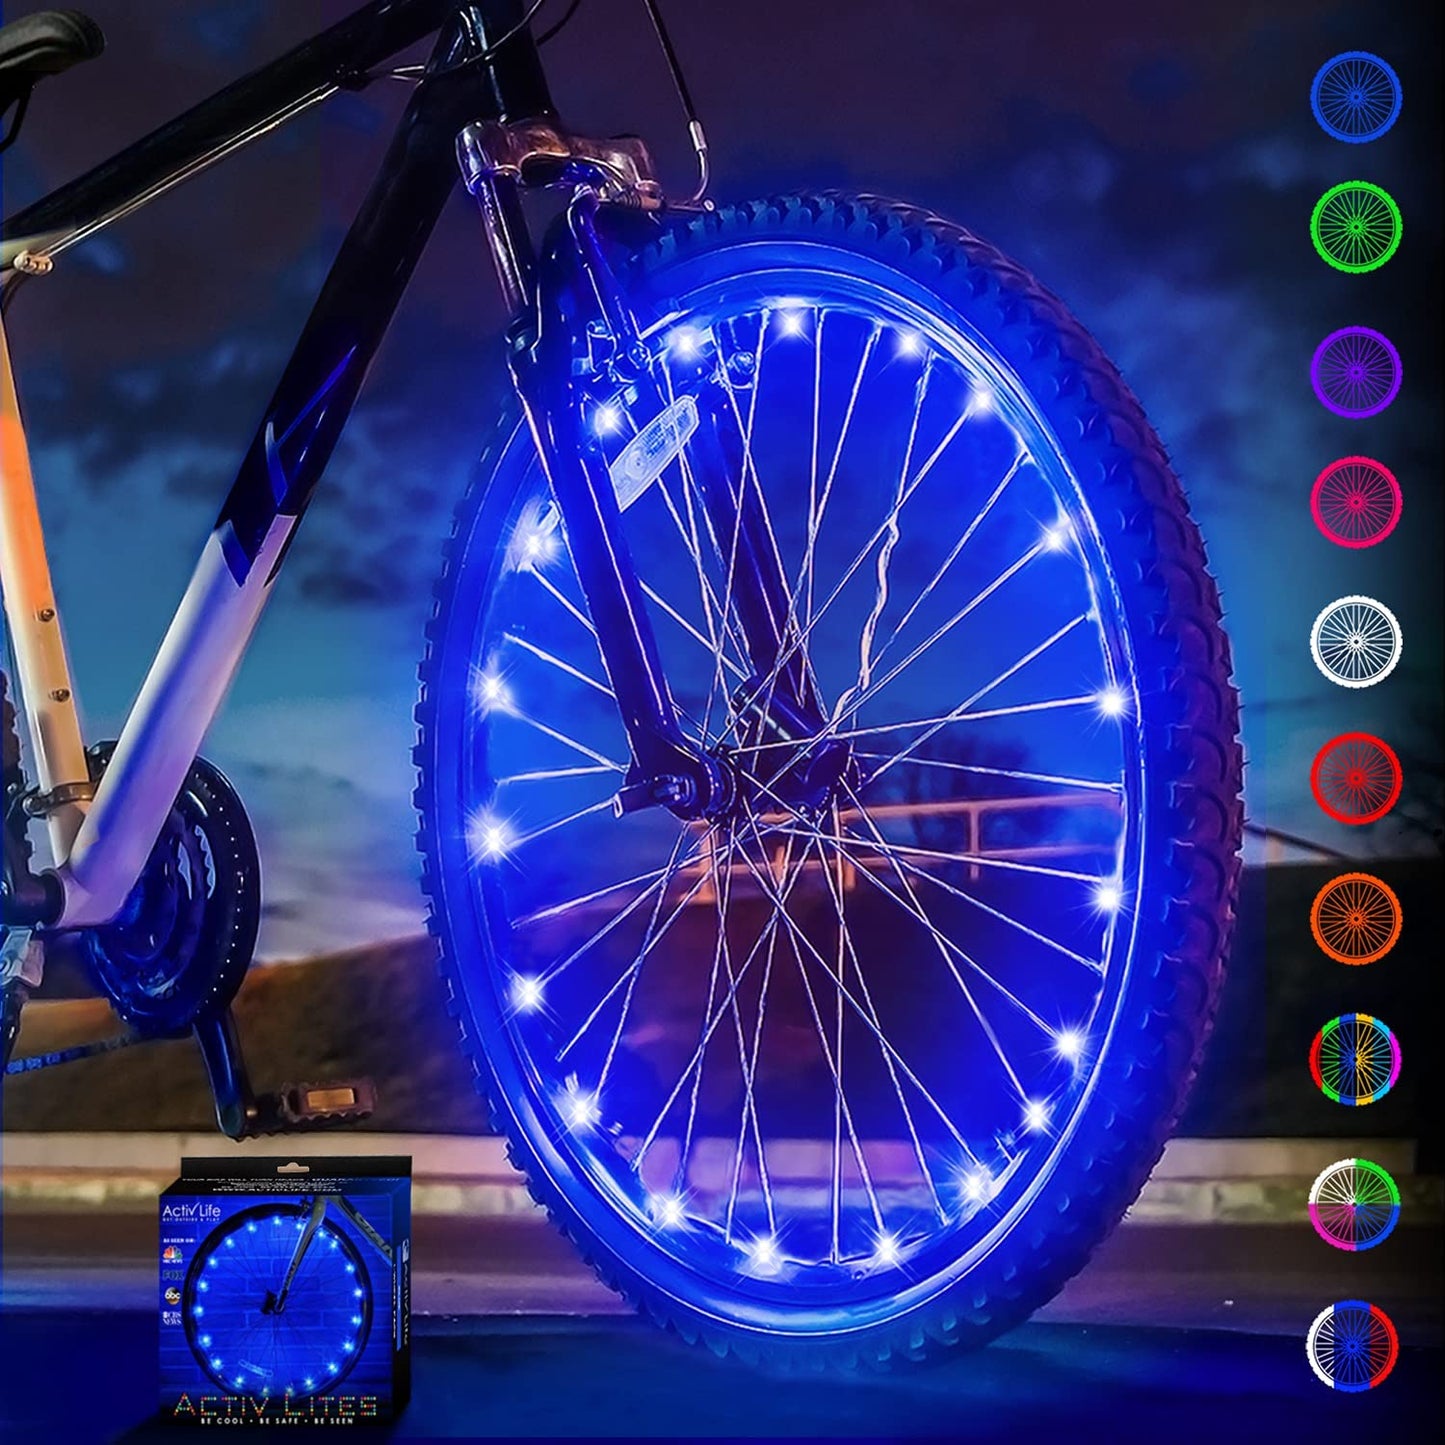 LED Bike Wheel Lights with Batteries Included! Get 100% Brighter and Visible from All Angles for Ultimate Safety & Style (1 Tire Pack)